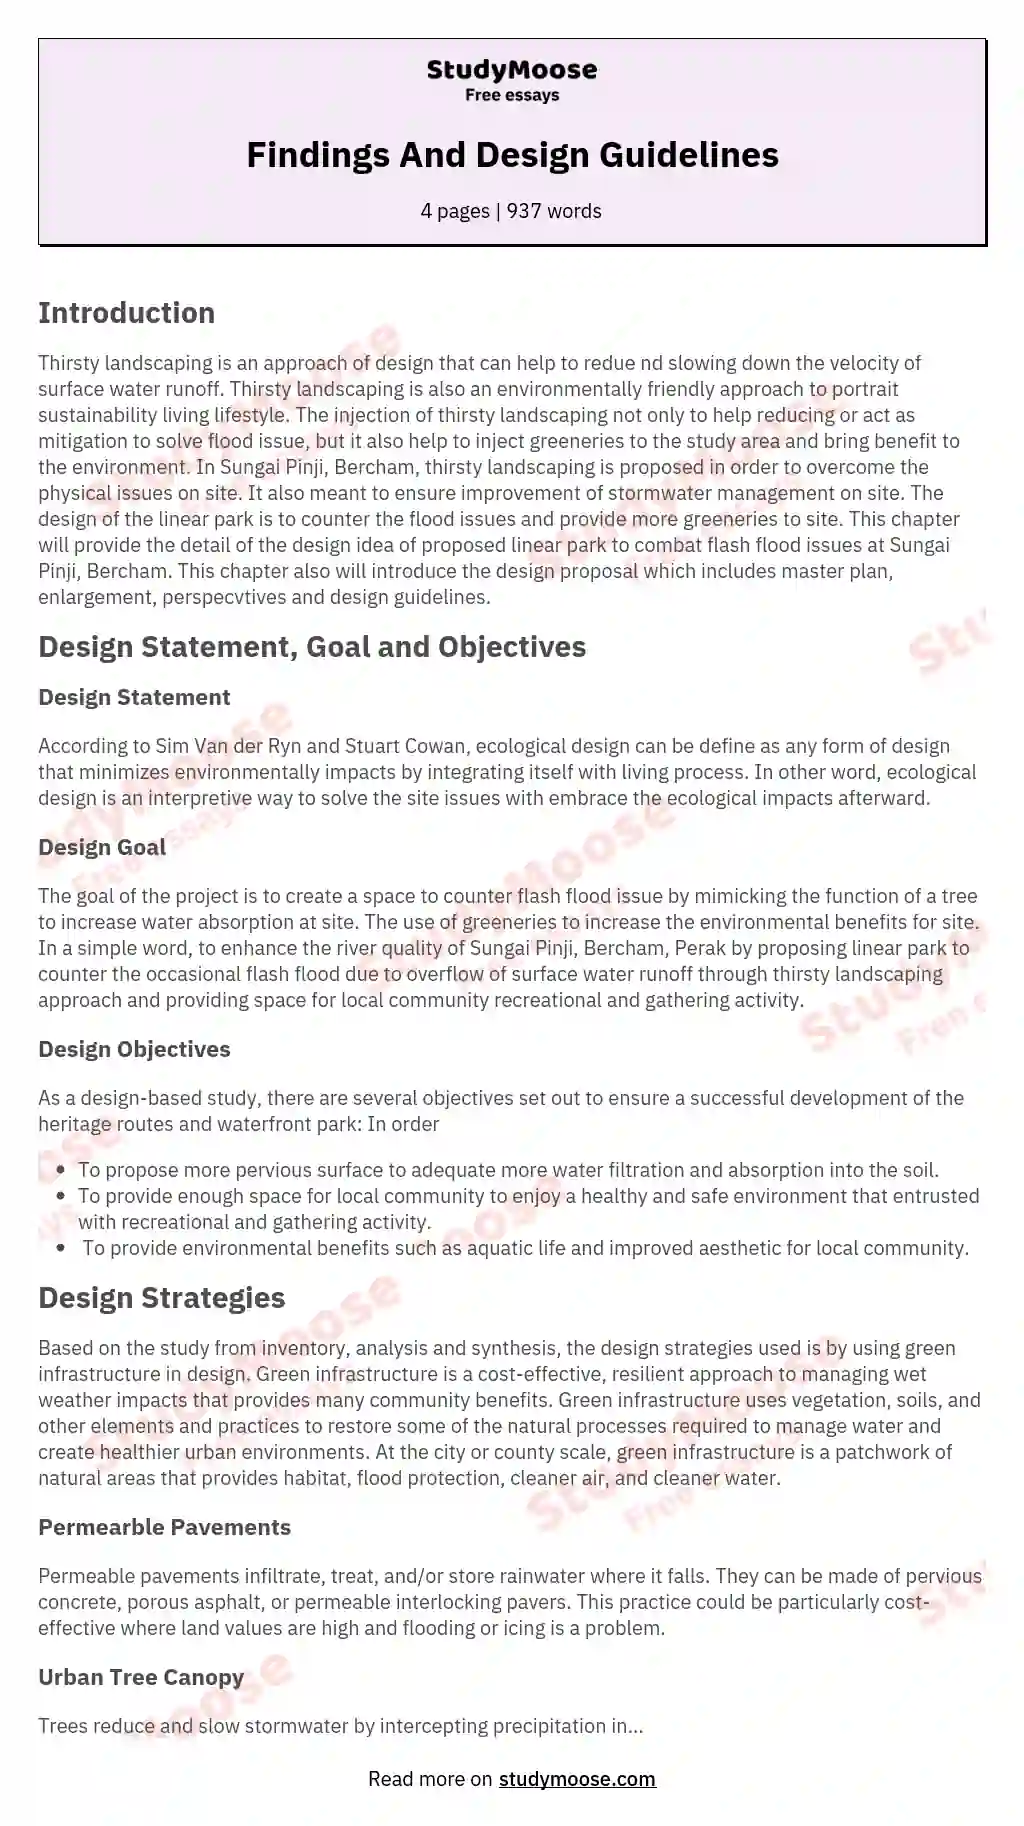 Findings And Design Guidelines essay